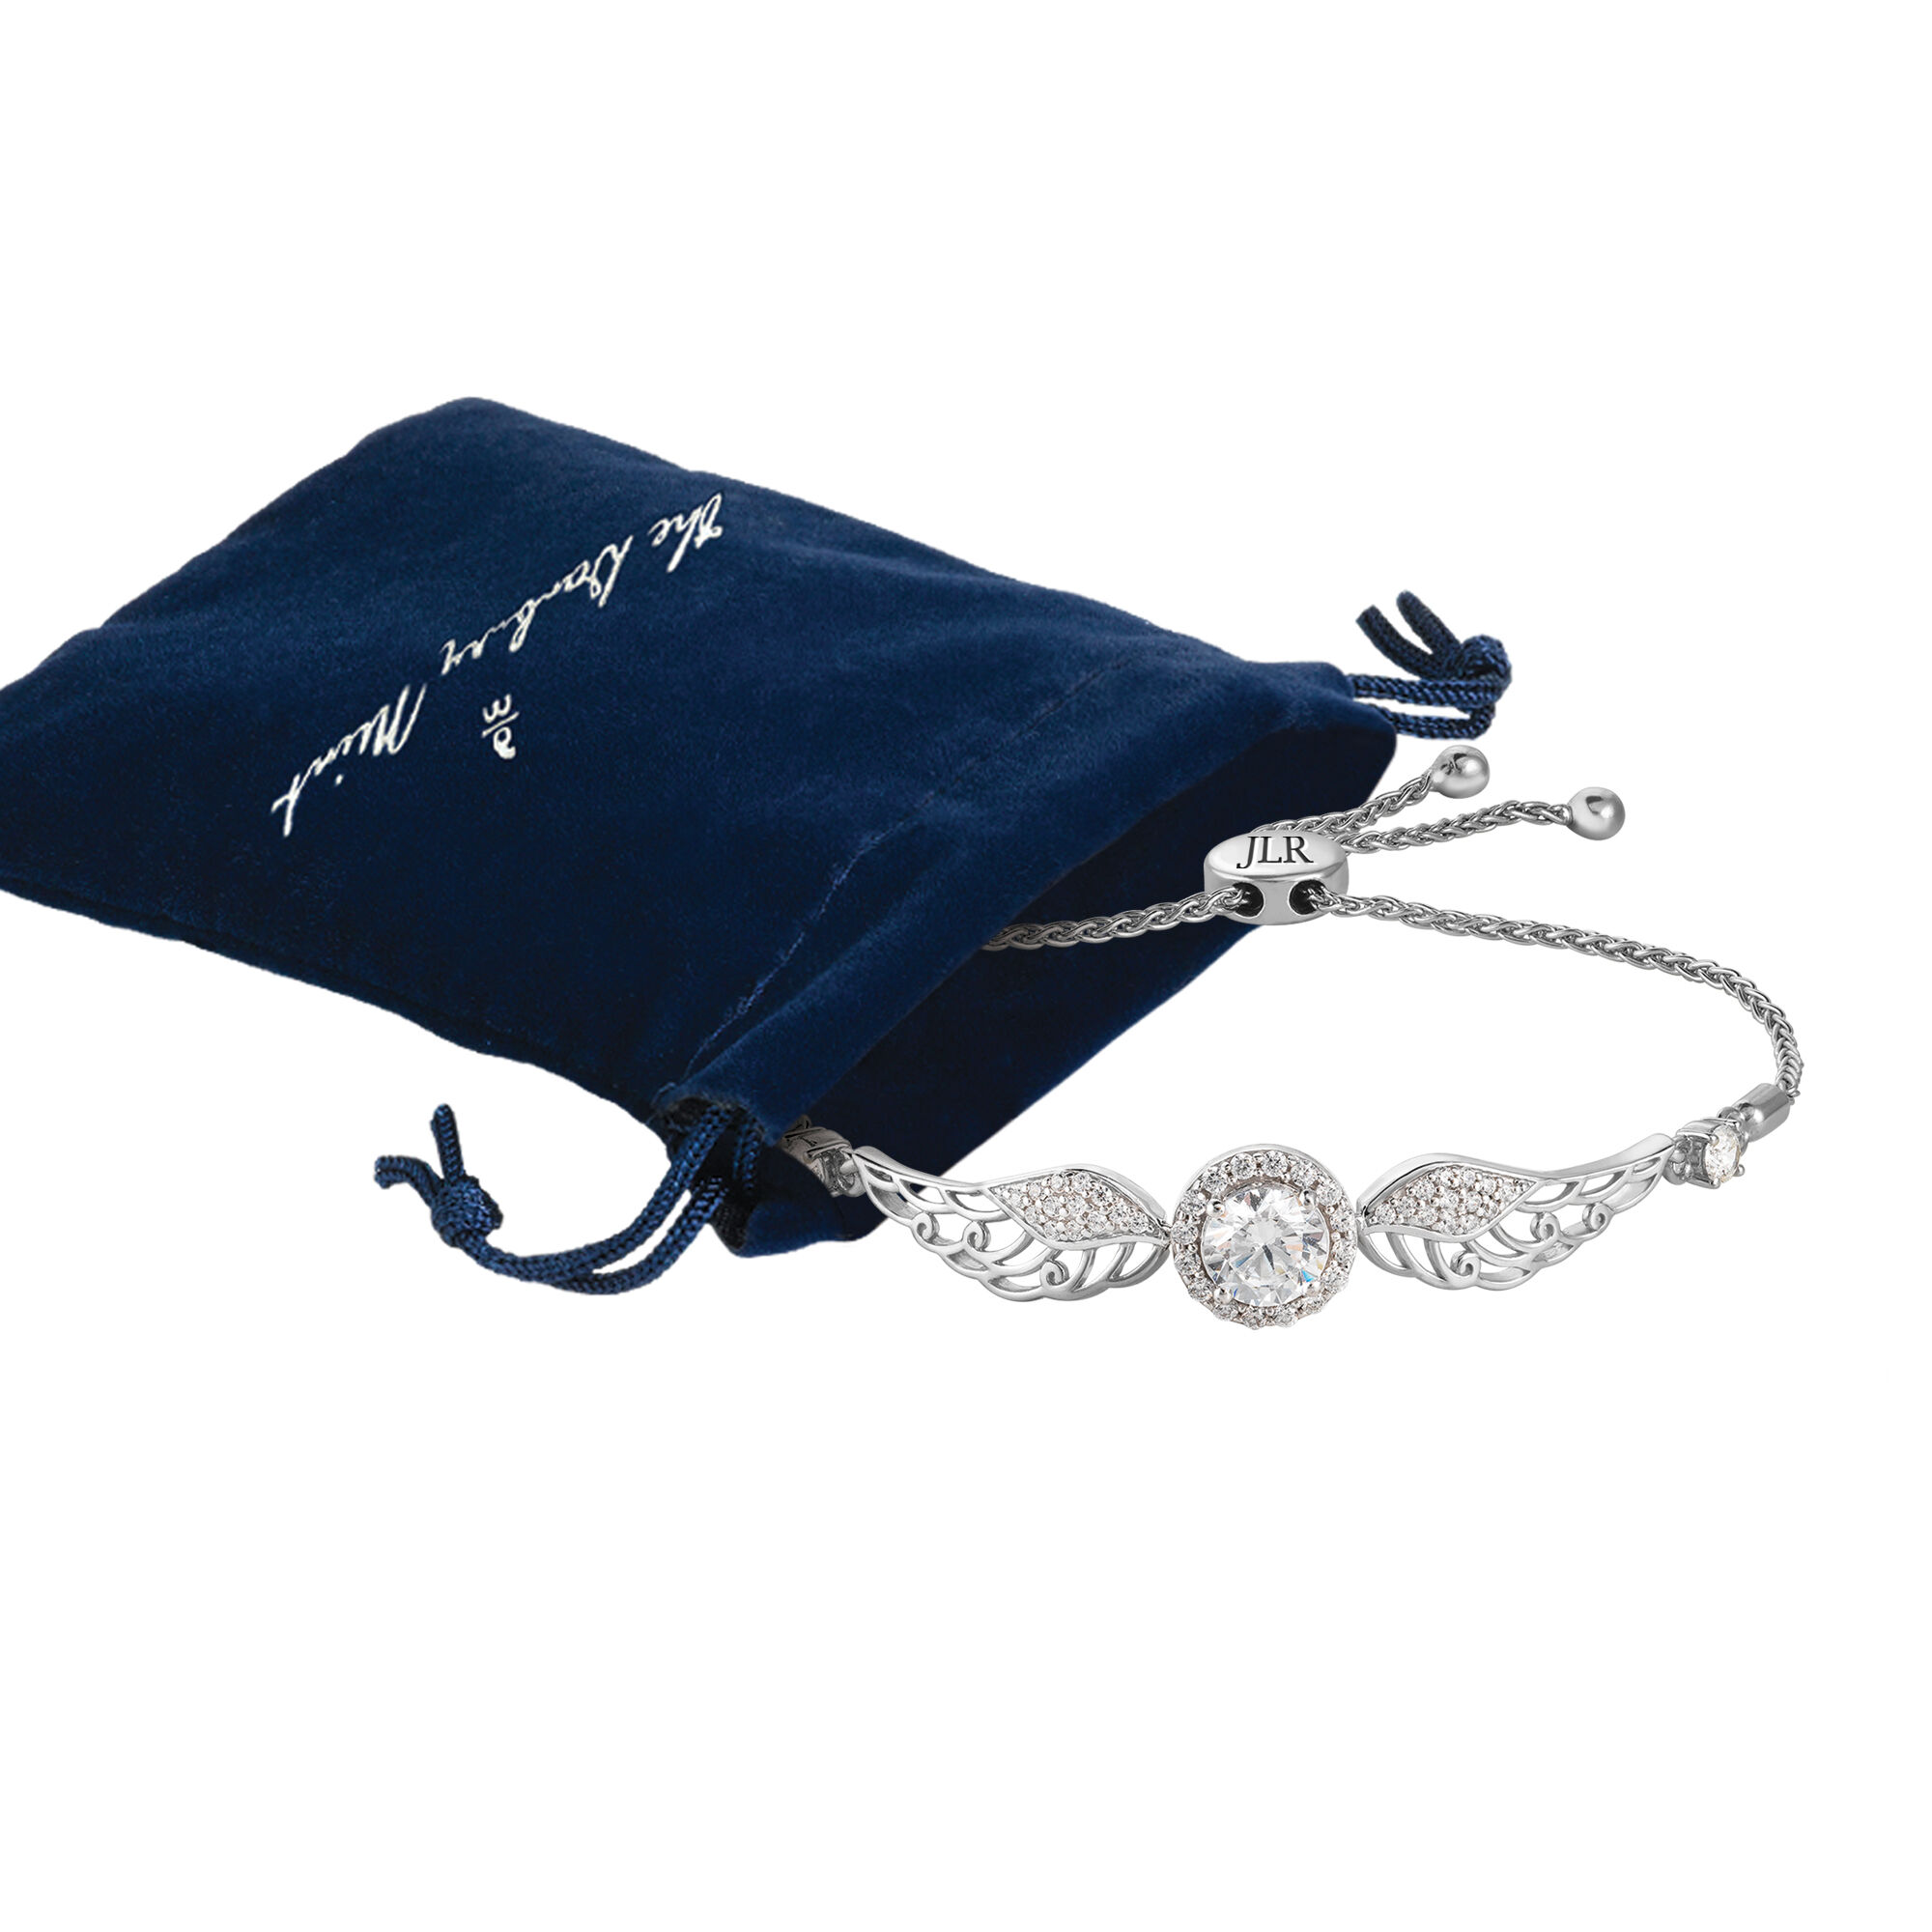 The Angel Wing Bracelet 6997 0010 g gift pouch